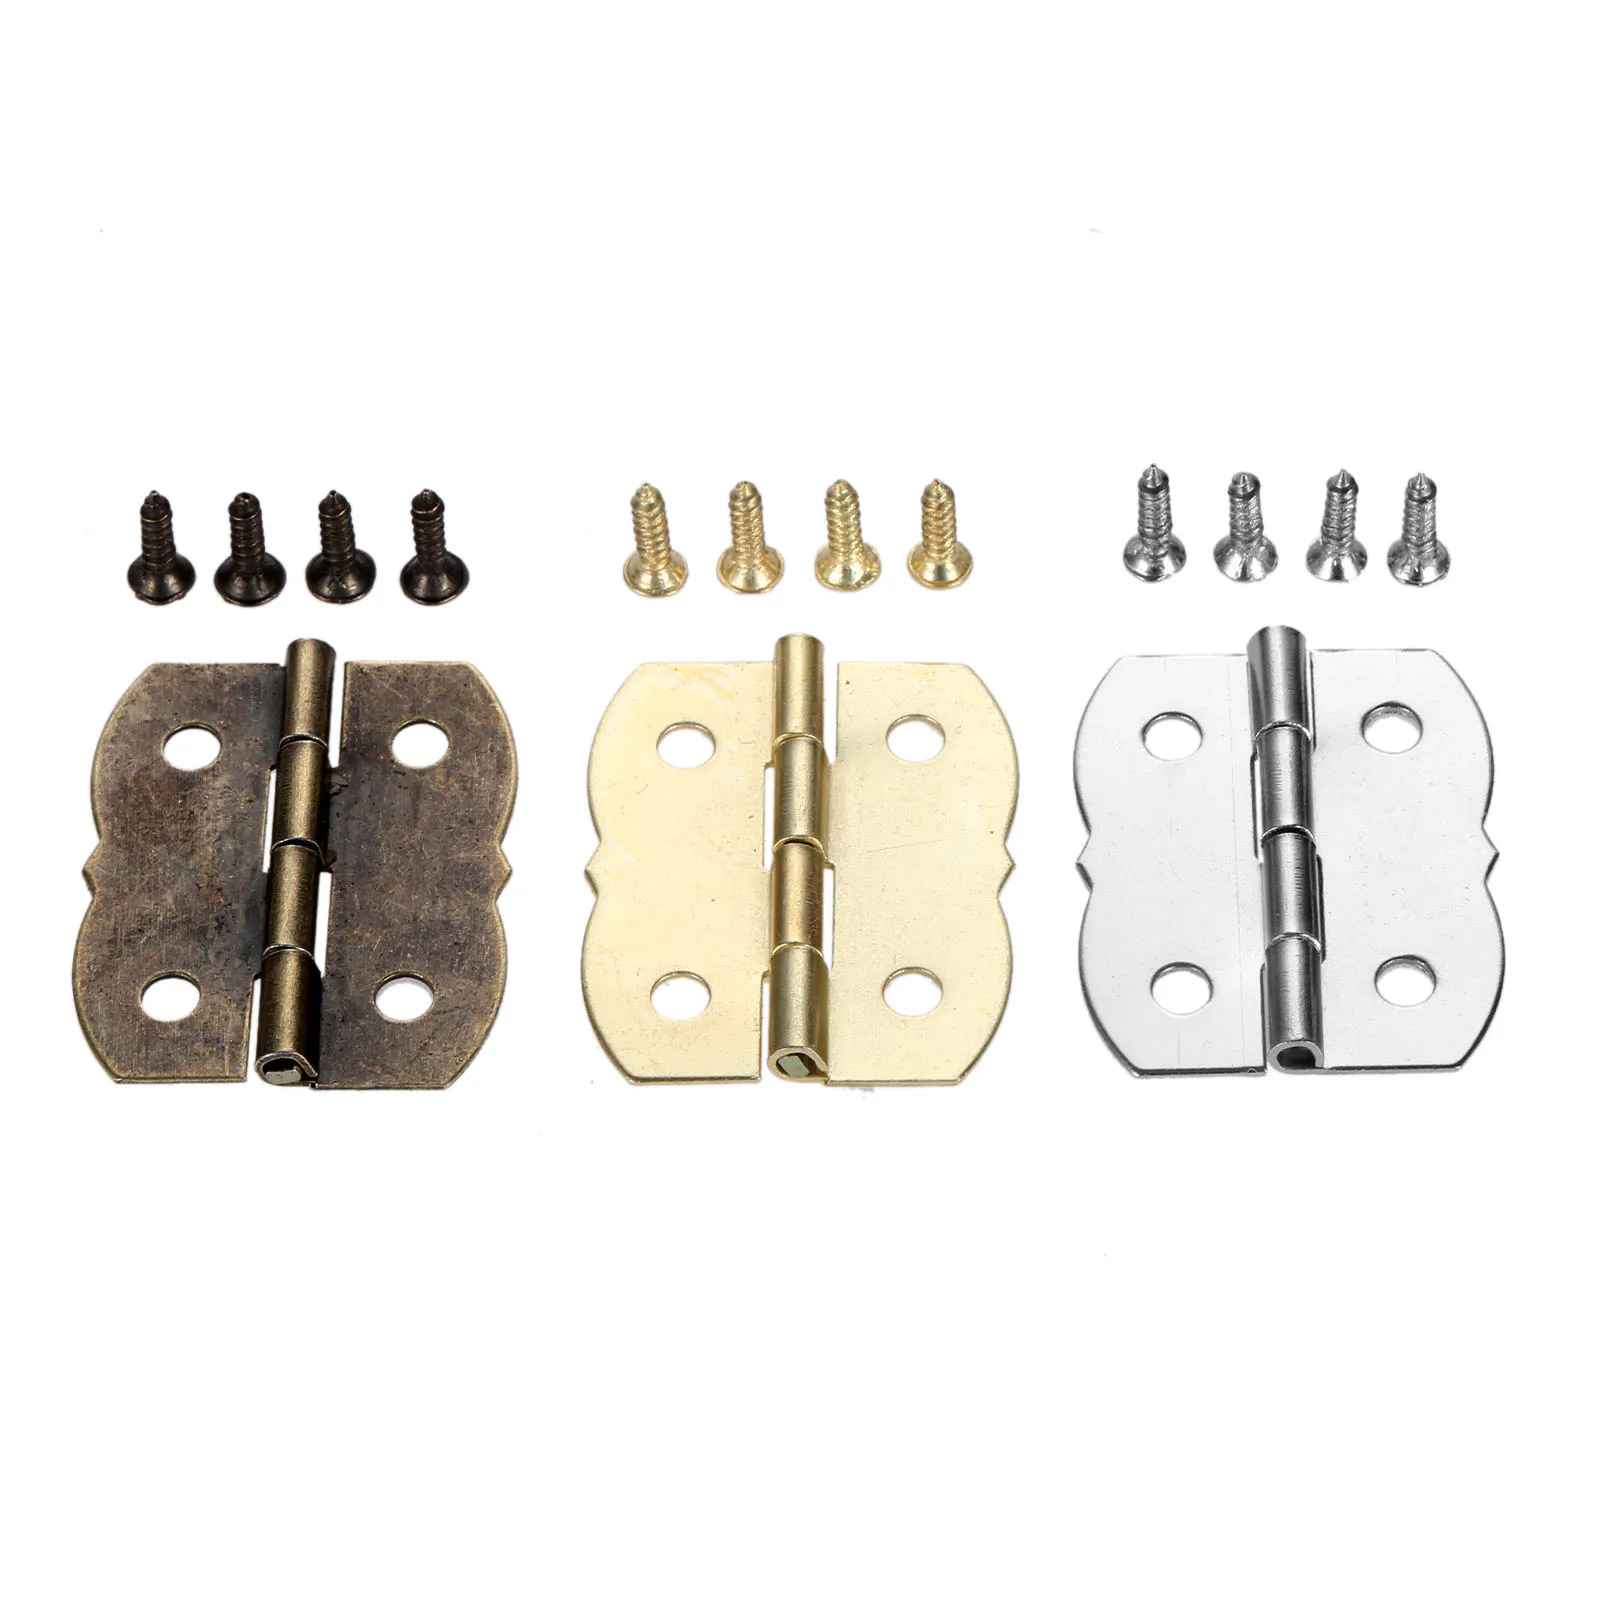 

50Pcs 30*25mm Small Hinges Butterfly Closing Cabinet Door Luggage Hinge 4 Holes Furniture Decoration Hinge Wooden Wine Box Hinge